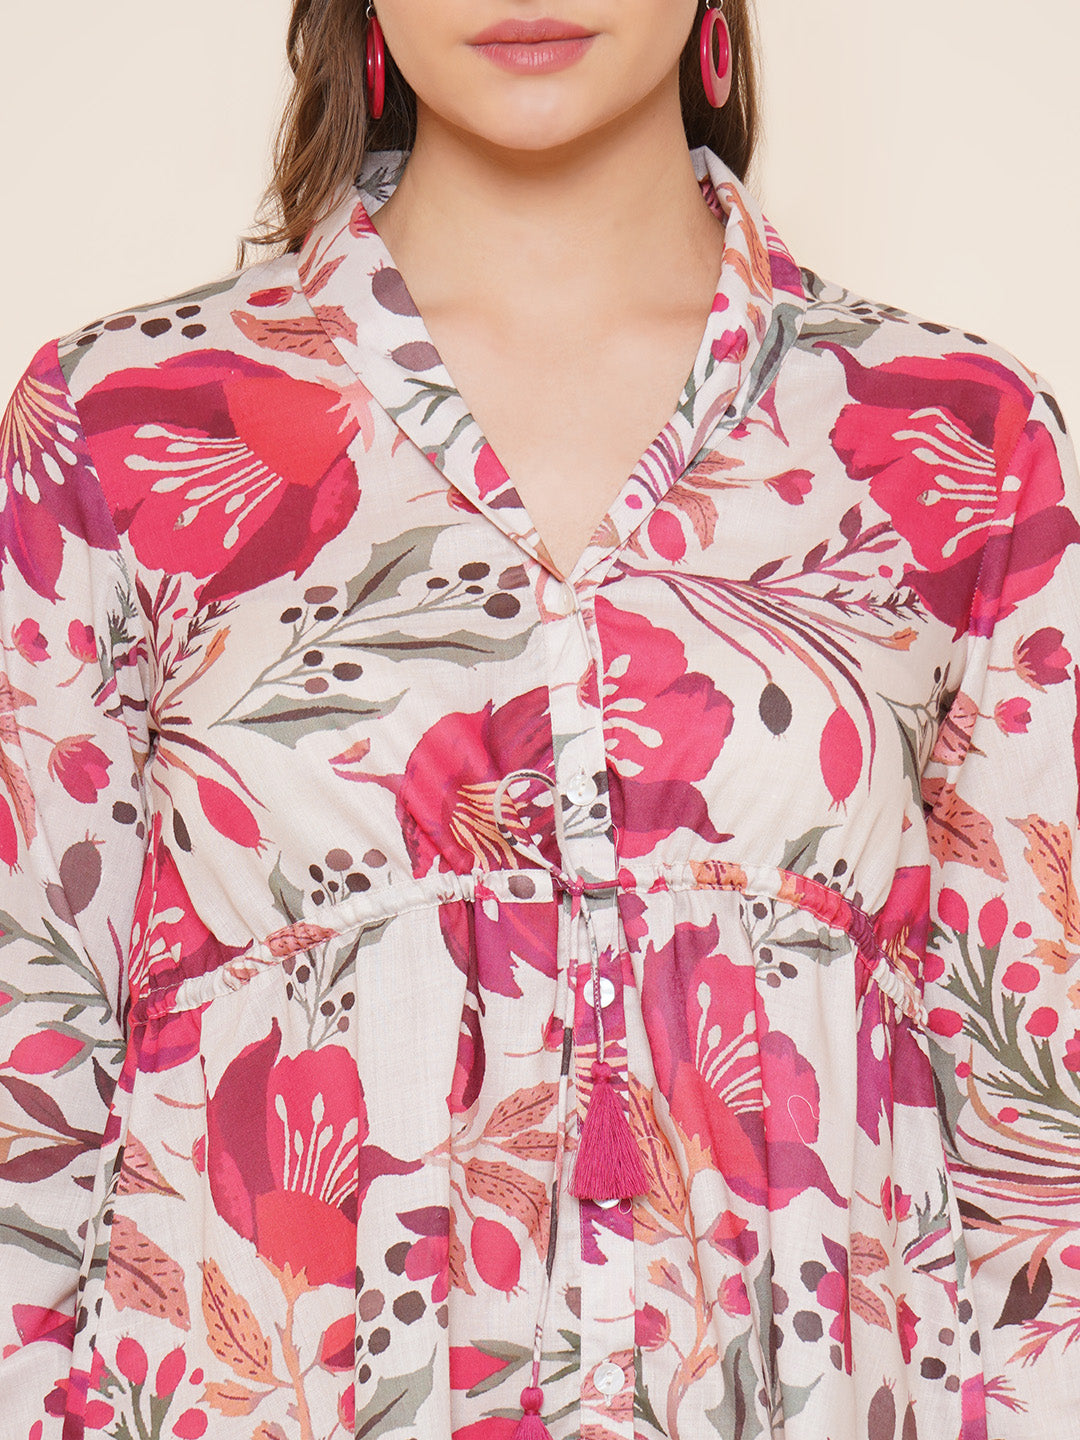 Bhama Couture Pink & White Printed Top